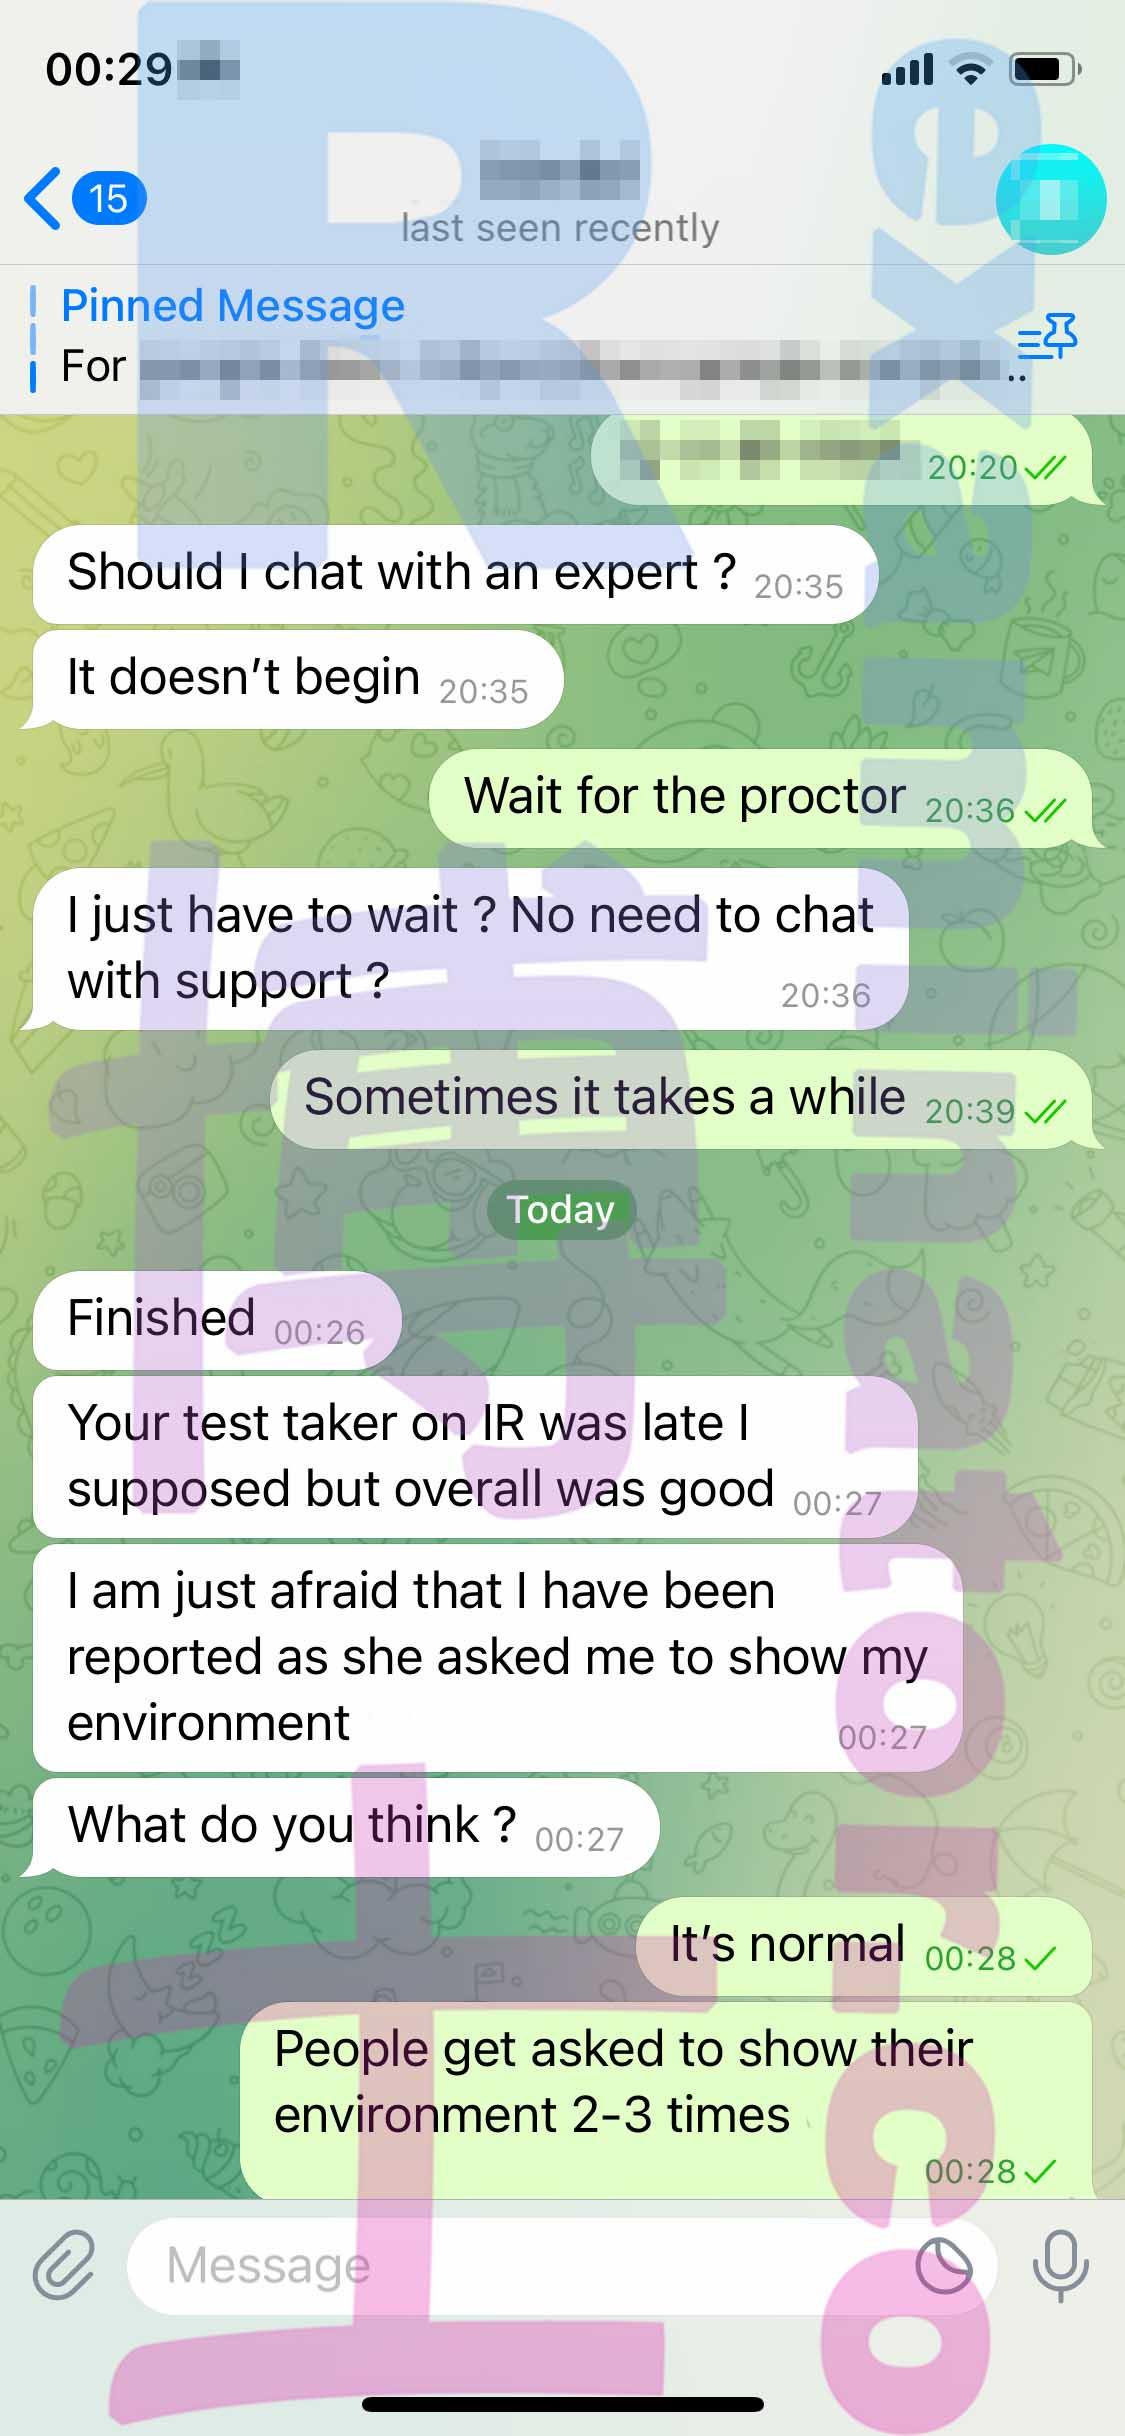 screenshot of chat logs for GMAT Cheating success story #439